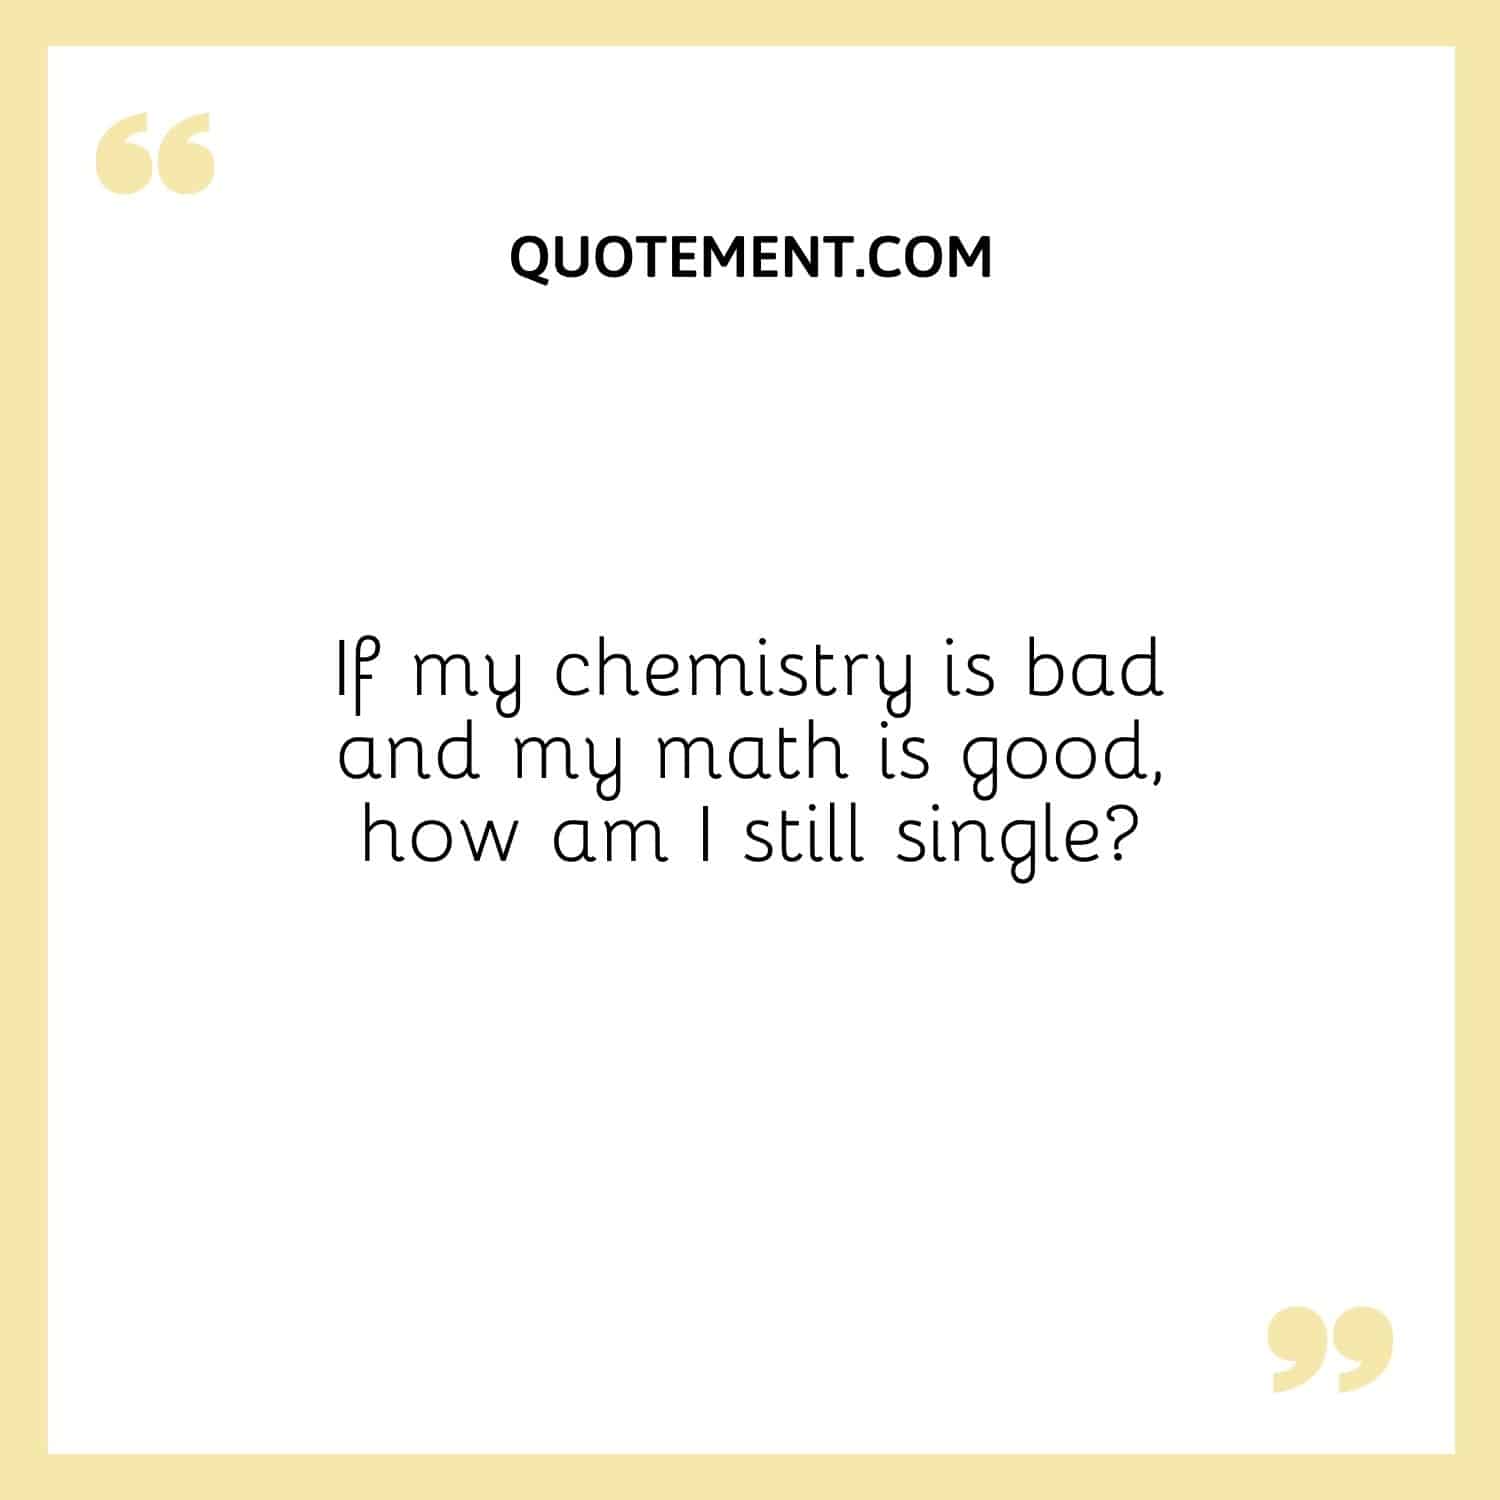 If my chemistry is bad and my math is good, how am I still single